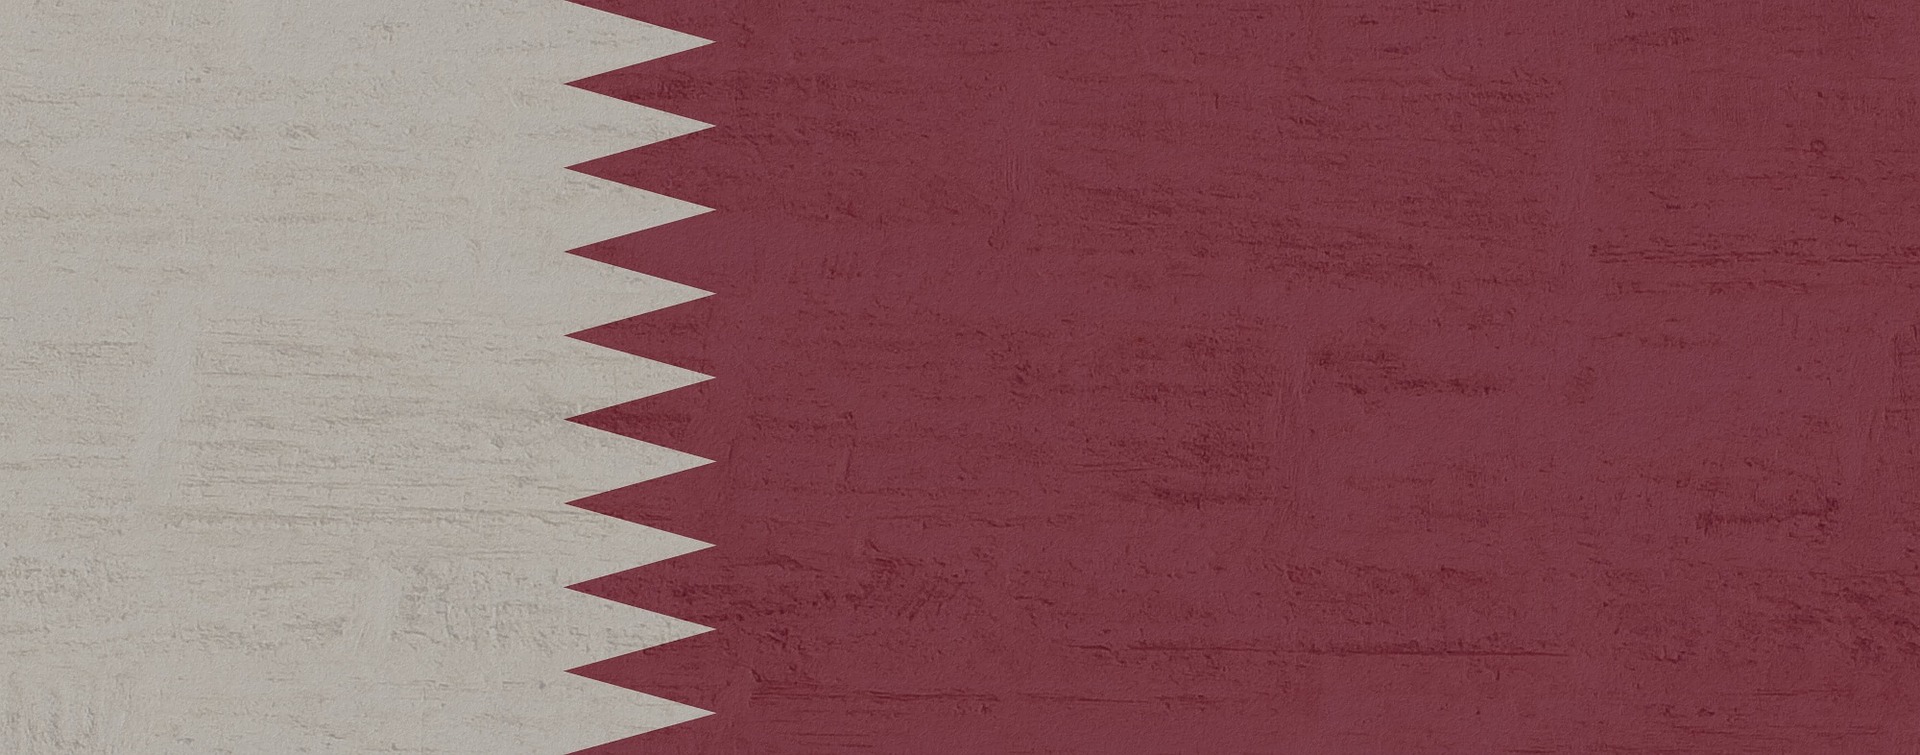 A SYMBOL OF PRIDE AND DIGNITY: THE FLAG OF QATAR HIDES A SPECIAL MEANING